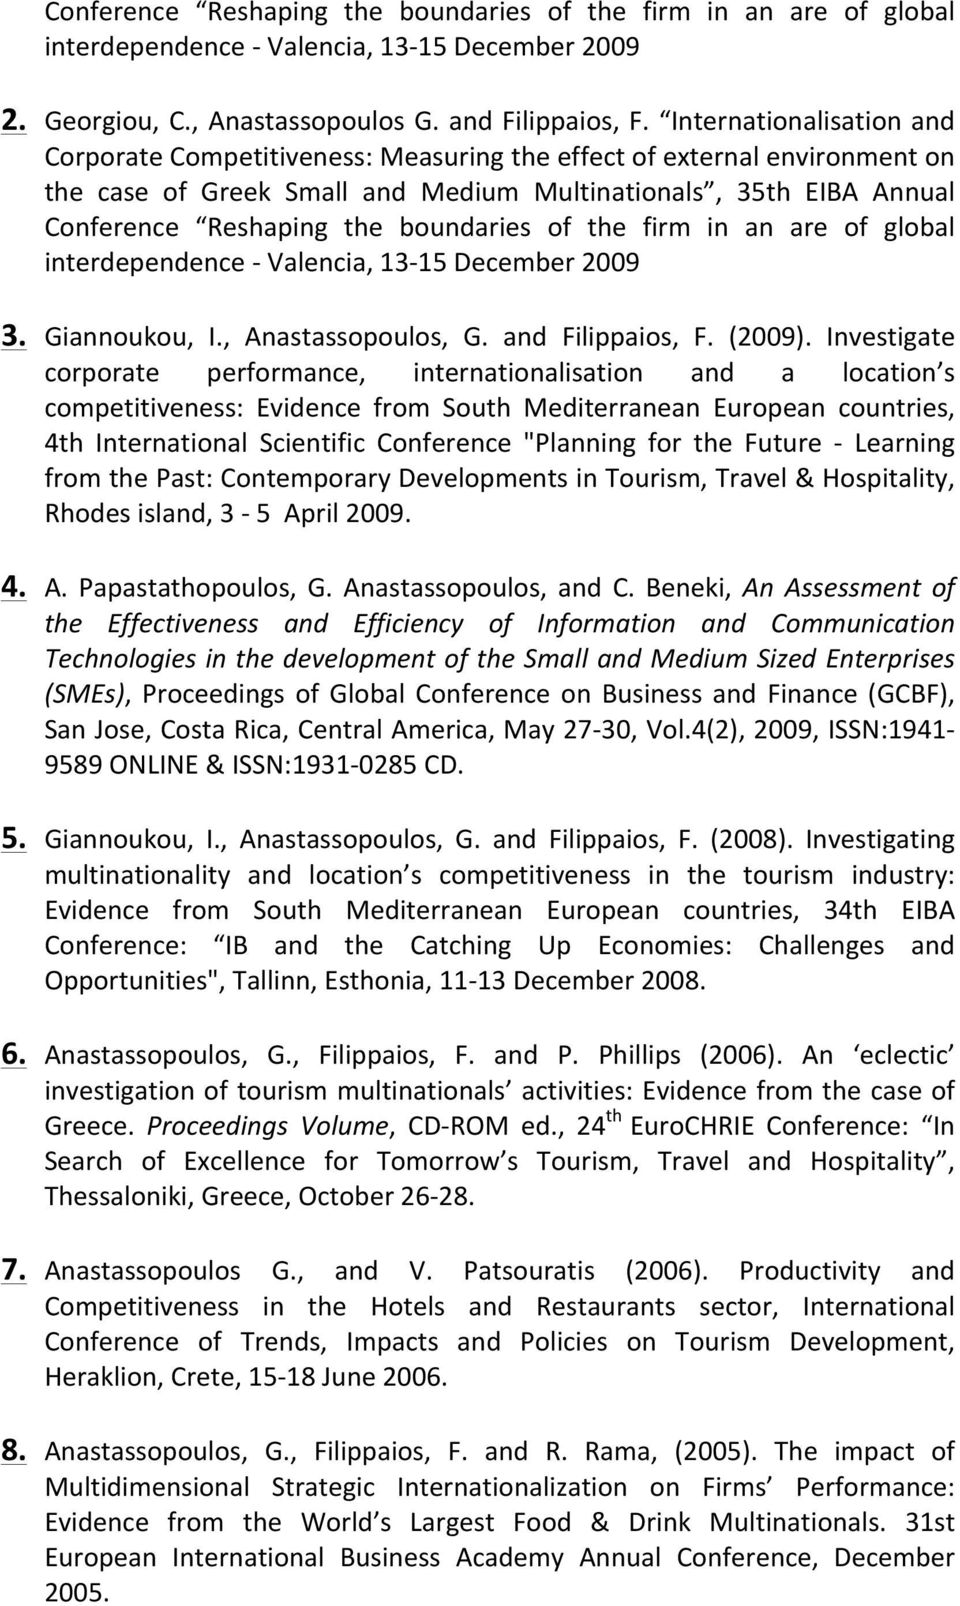 boundaries of the firm in an are of global interdependence - Valencia, 13-15 December 2009 3. Giannoukou, I., Anastassopoulos, G. and Filippaios, F. (2009).